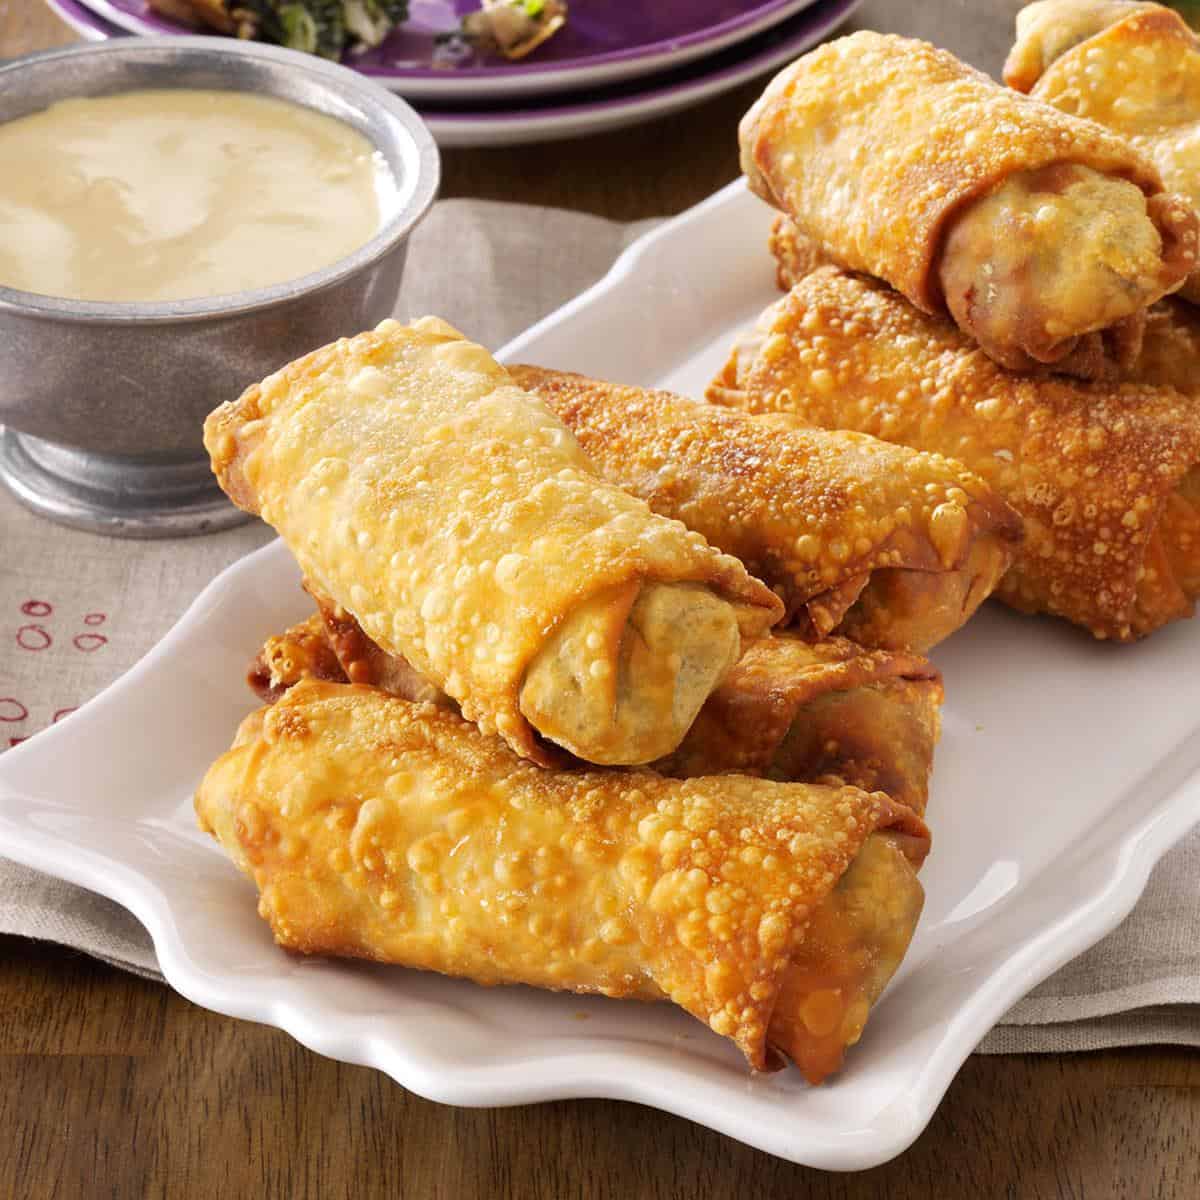 Southern style egg rolls